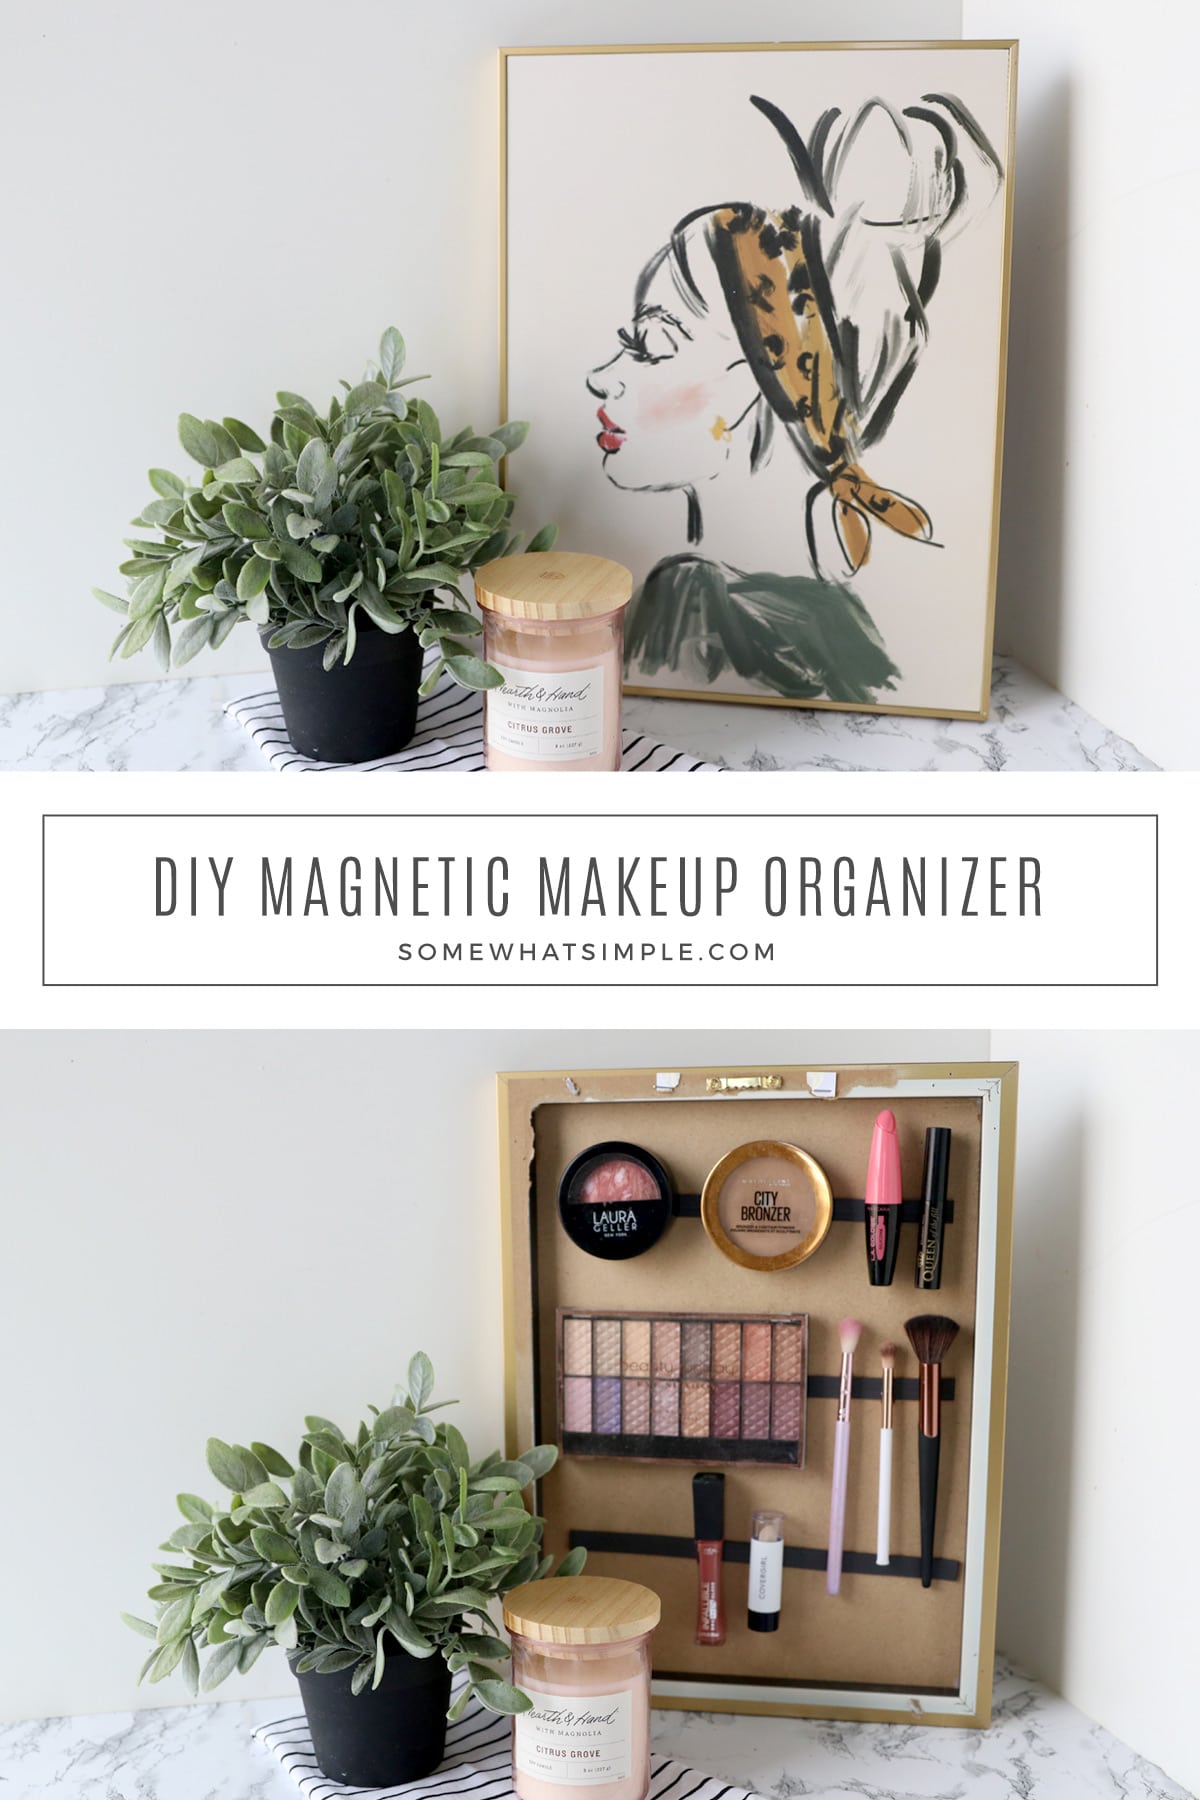 Using a simple canvas wall hanging, you can make a DIY makeup organizer and keep all of your beauty essentials organized. via @somewhatsimple